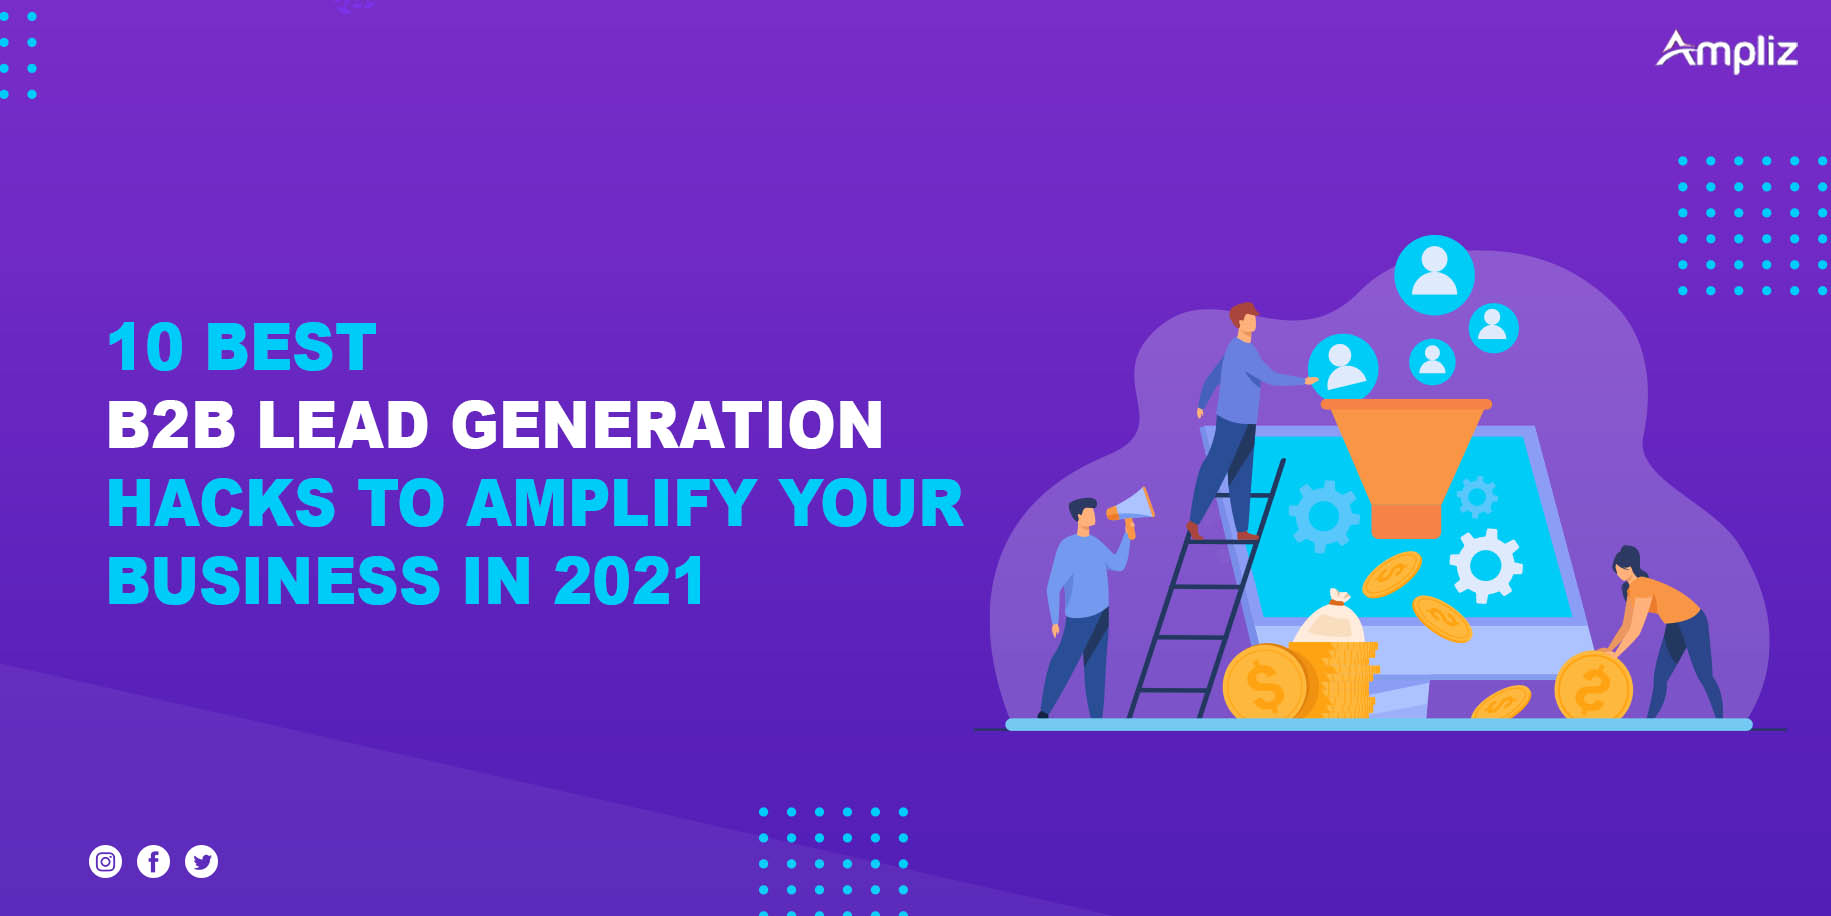 10 BEST B2B LEAD GENERATION HACKS TO AMPLIFY YOUR BUSINESS IN 2021